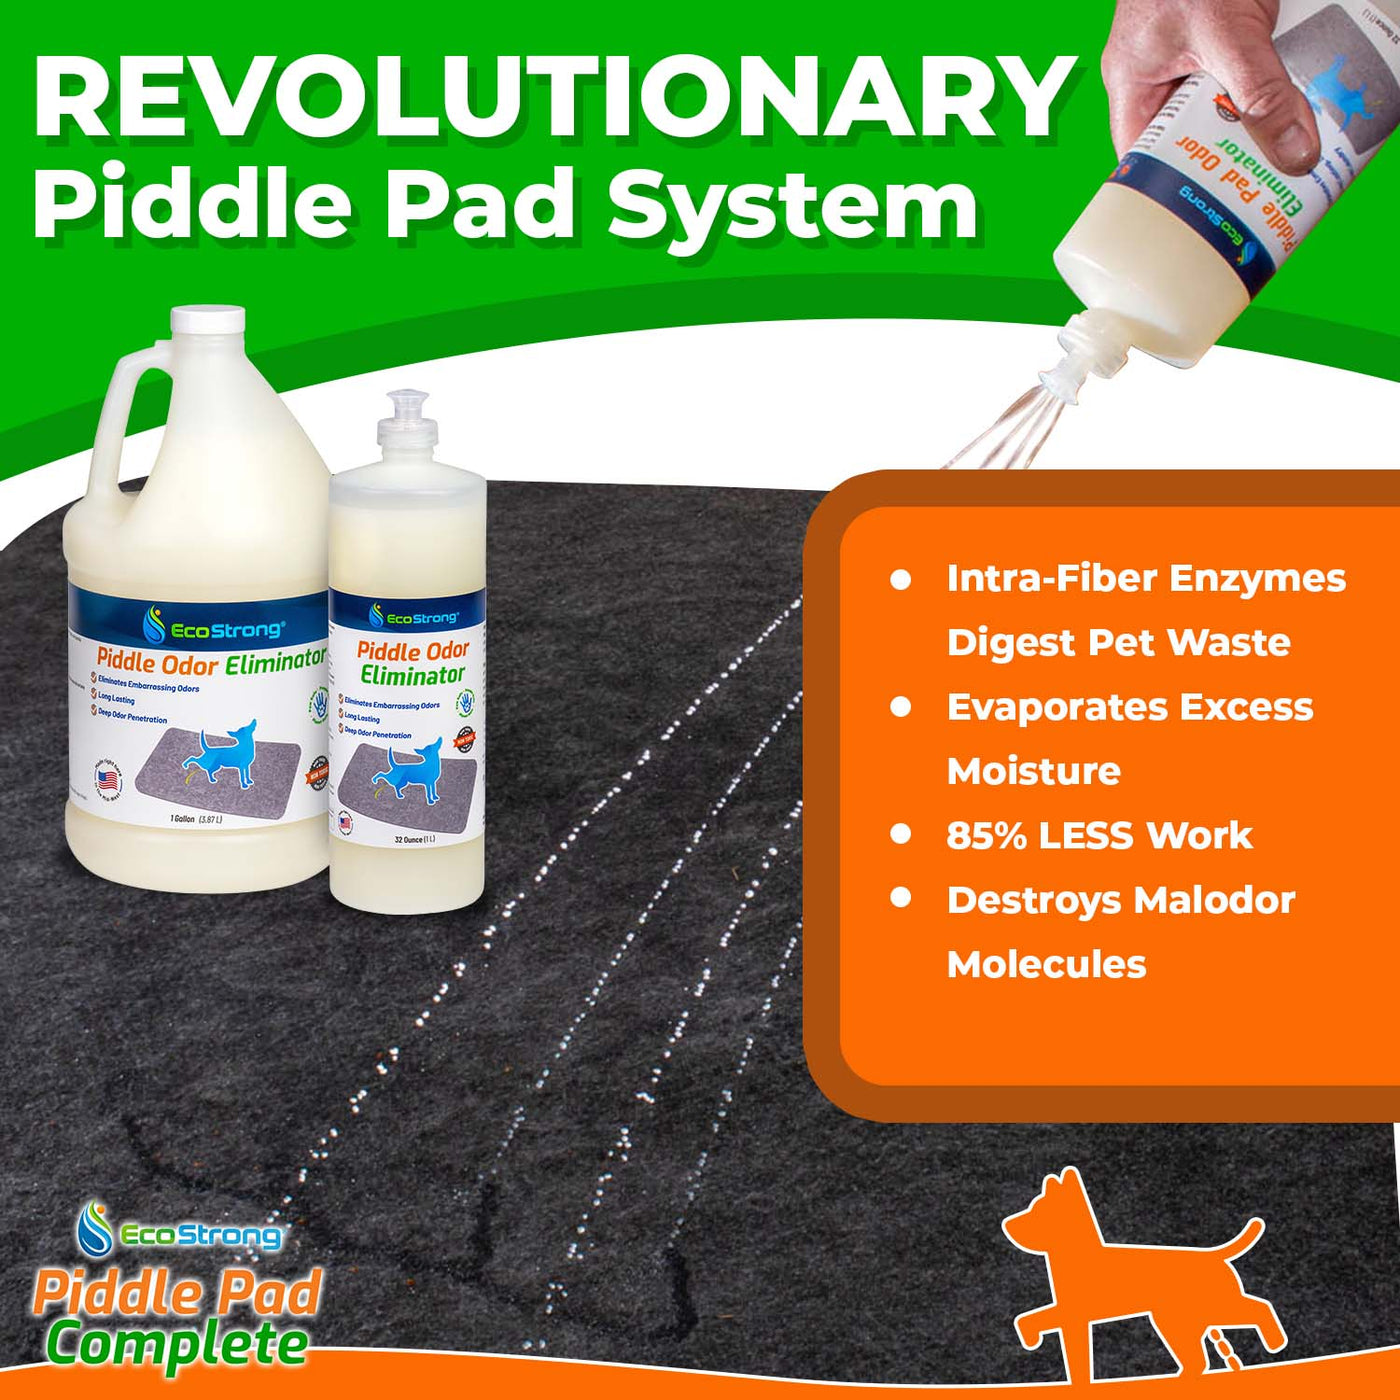 EcoStrong Piddle Pad Complete#size_two-36-inch-circle-pads-and-32-oz-piddle-odor-eliminator